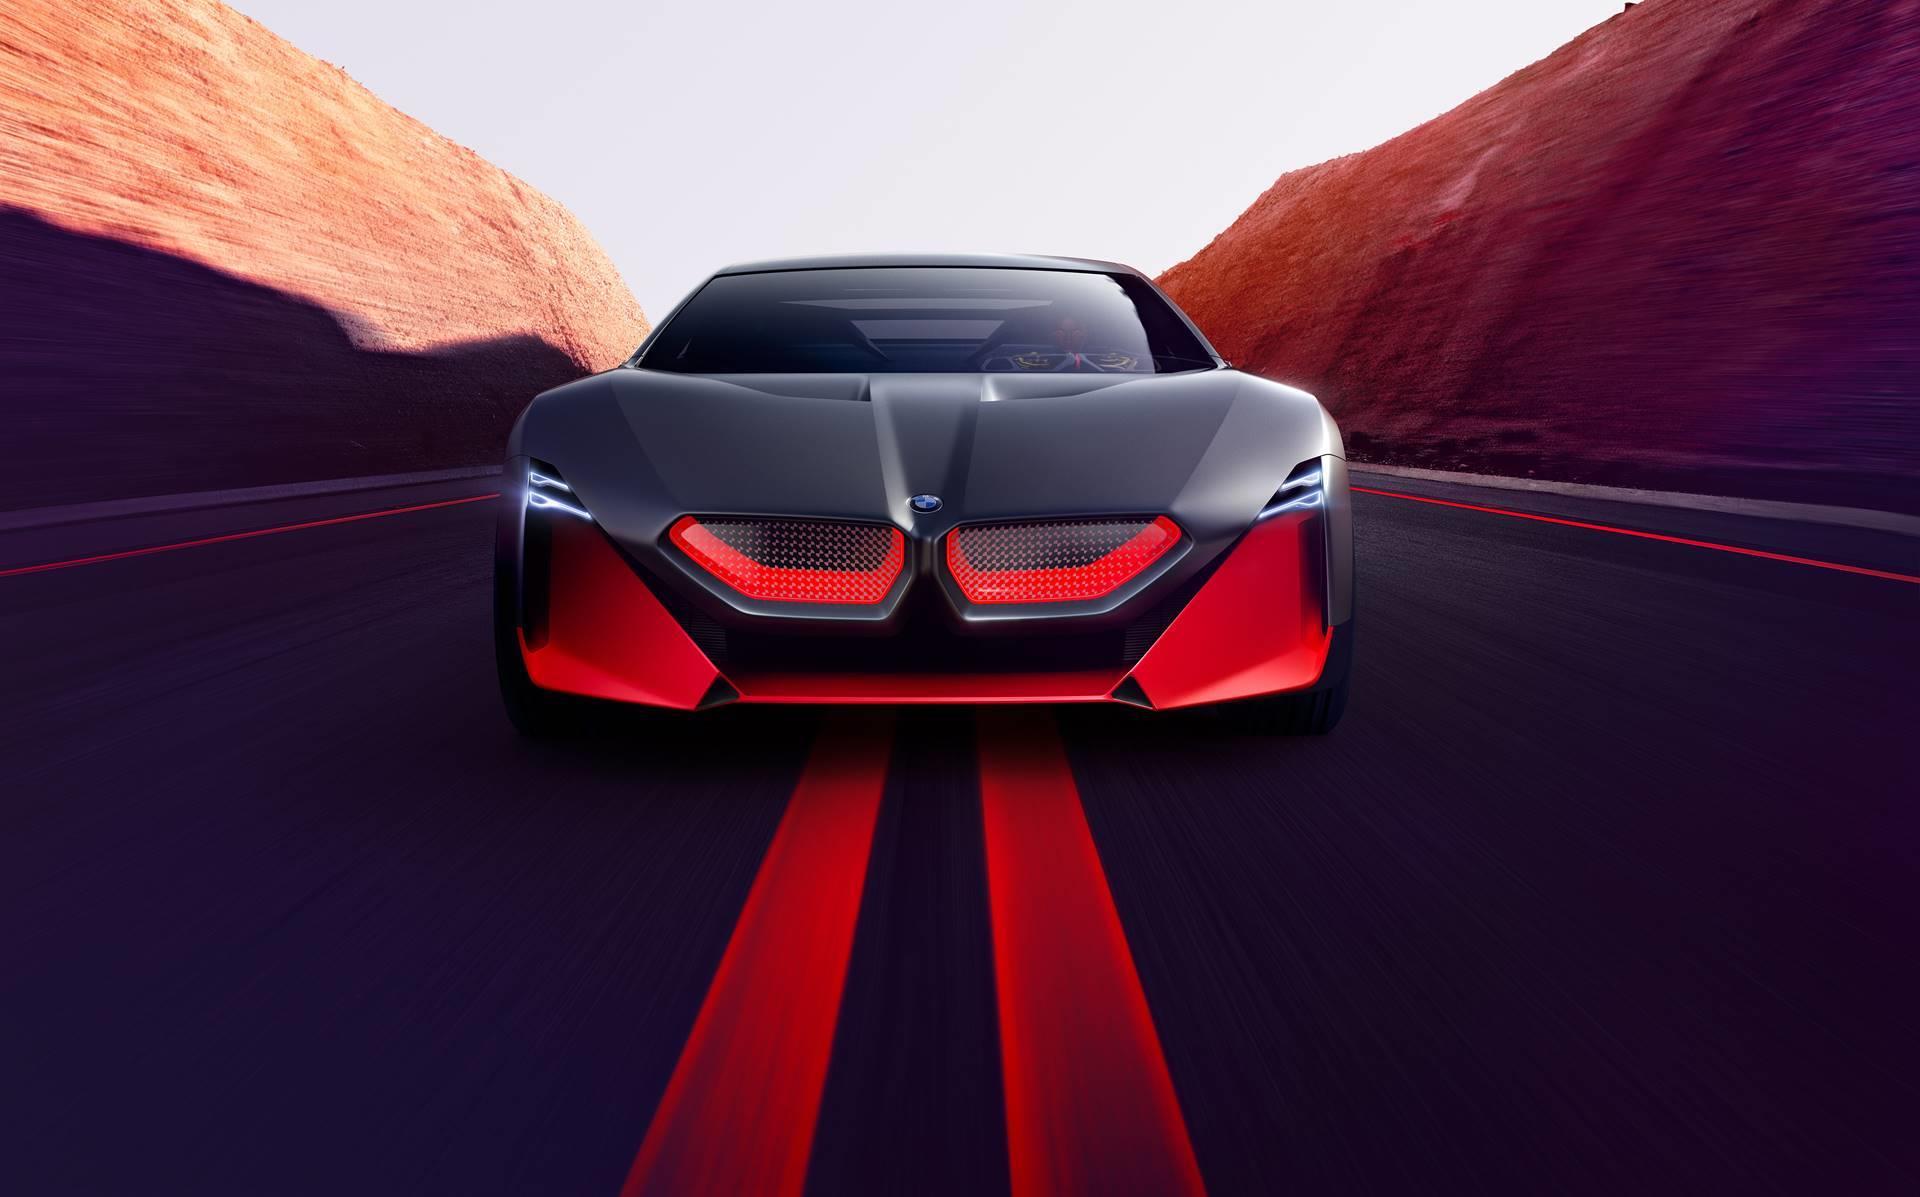 2019 Bmw Vision M Next Concept News And Information Research And Pricing